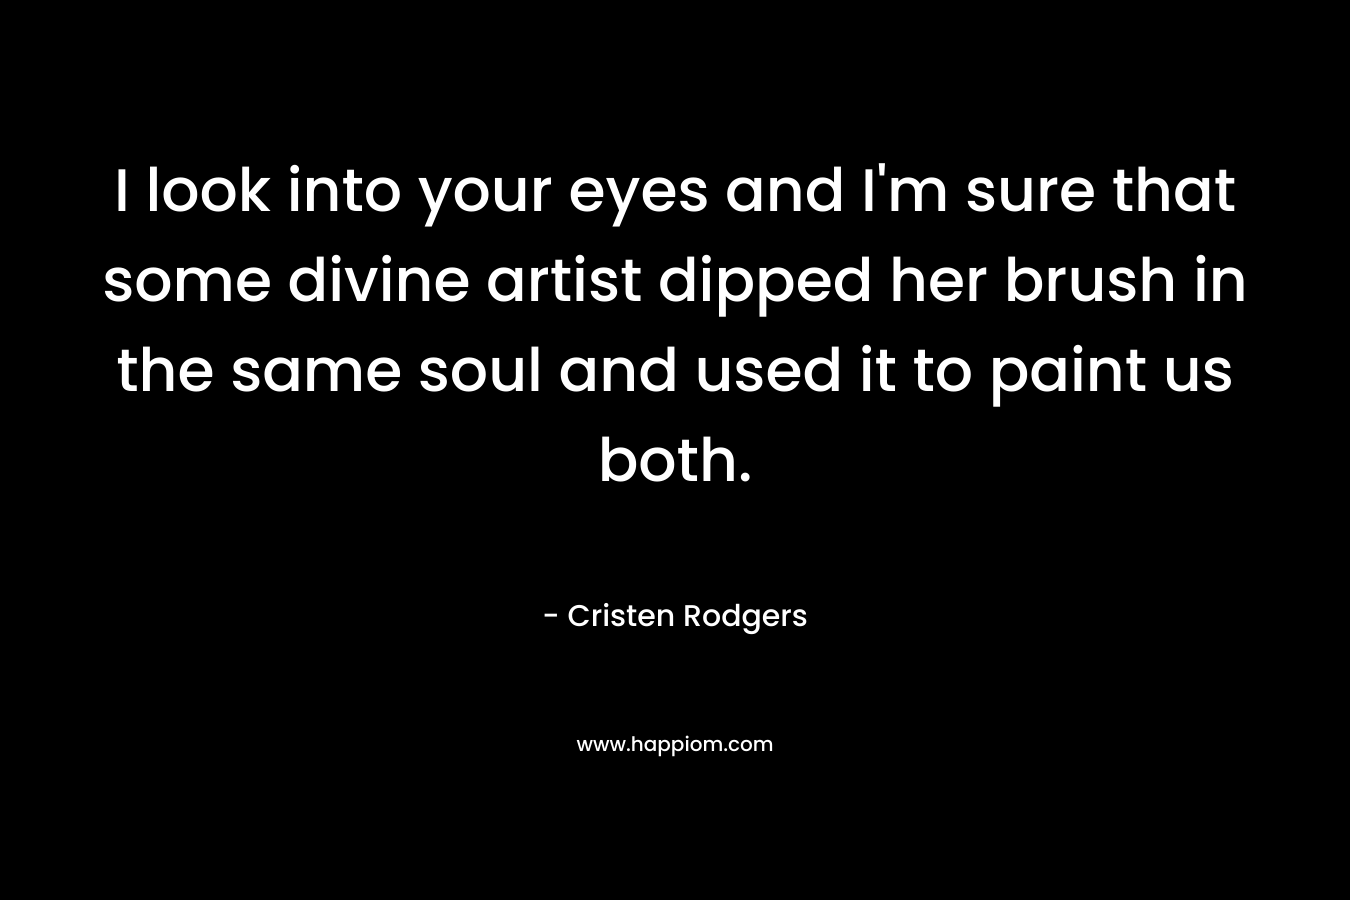 I look into your eyes and I'm sure that some divine artist dipped her brush in the same soul and used it to paint us both.